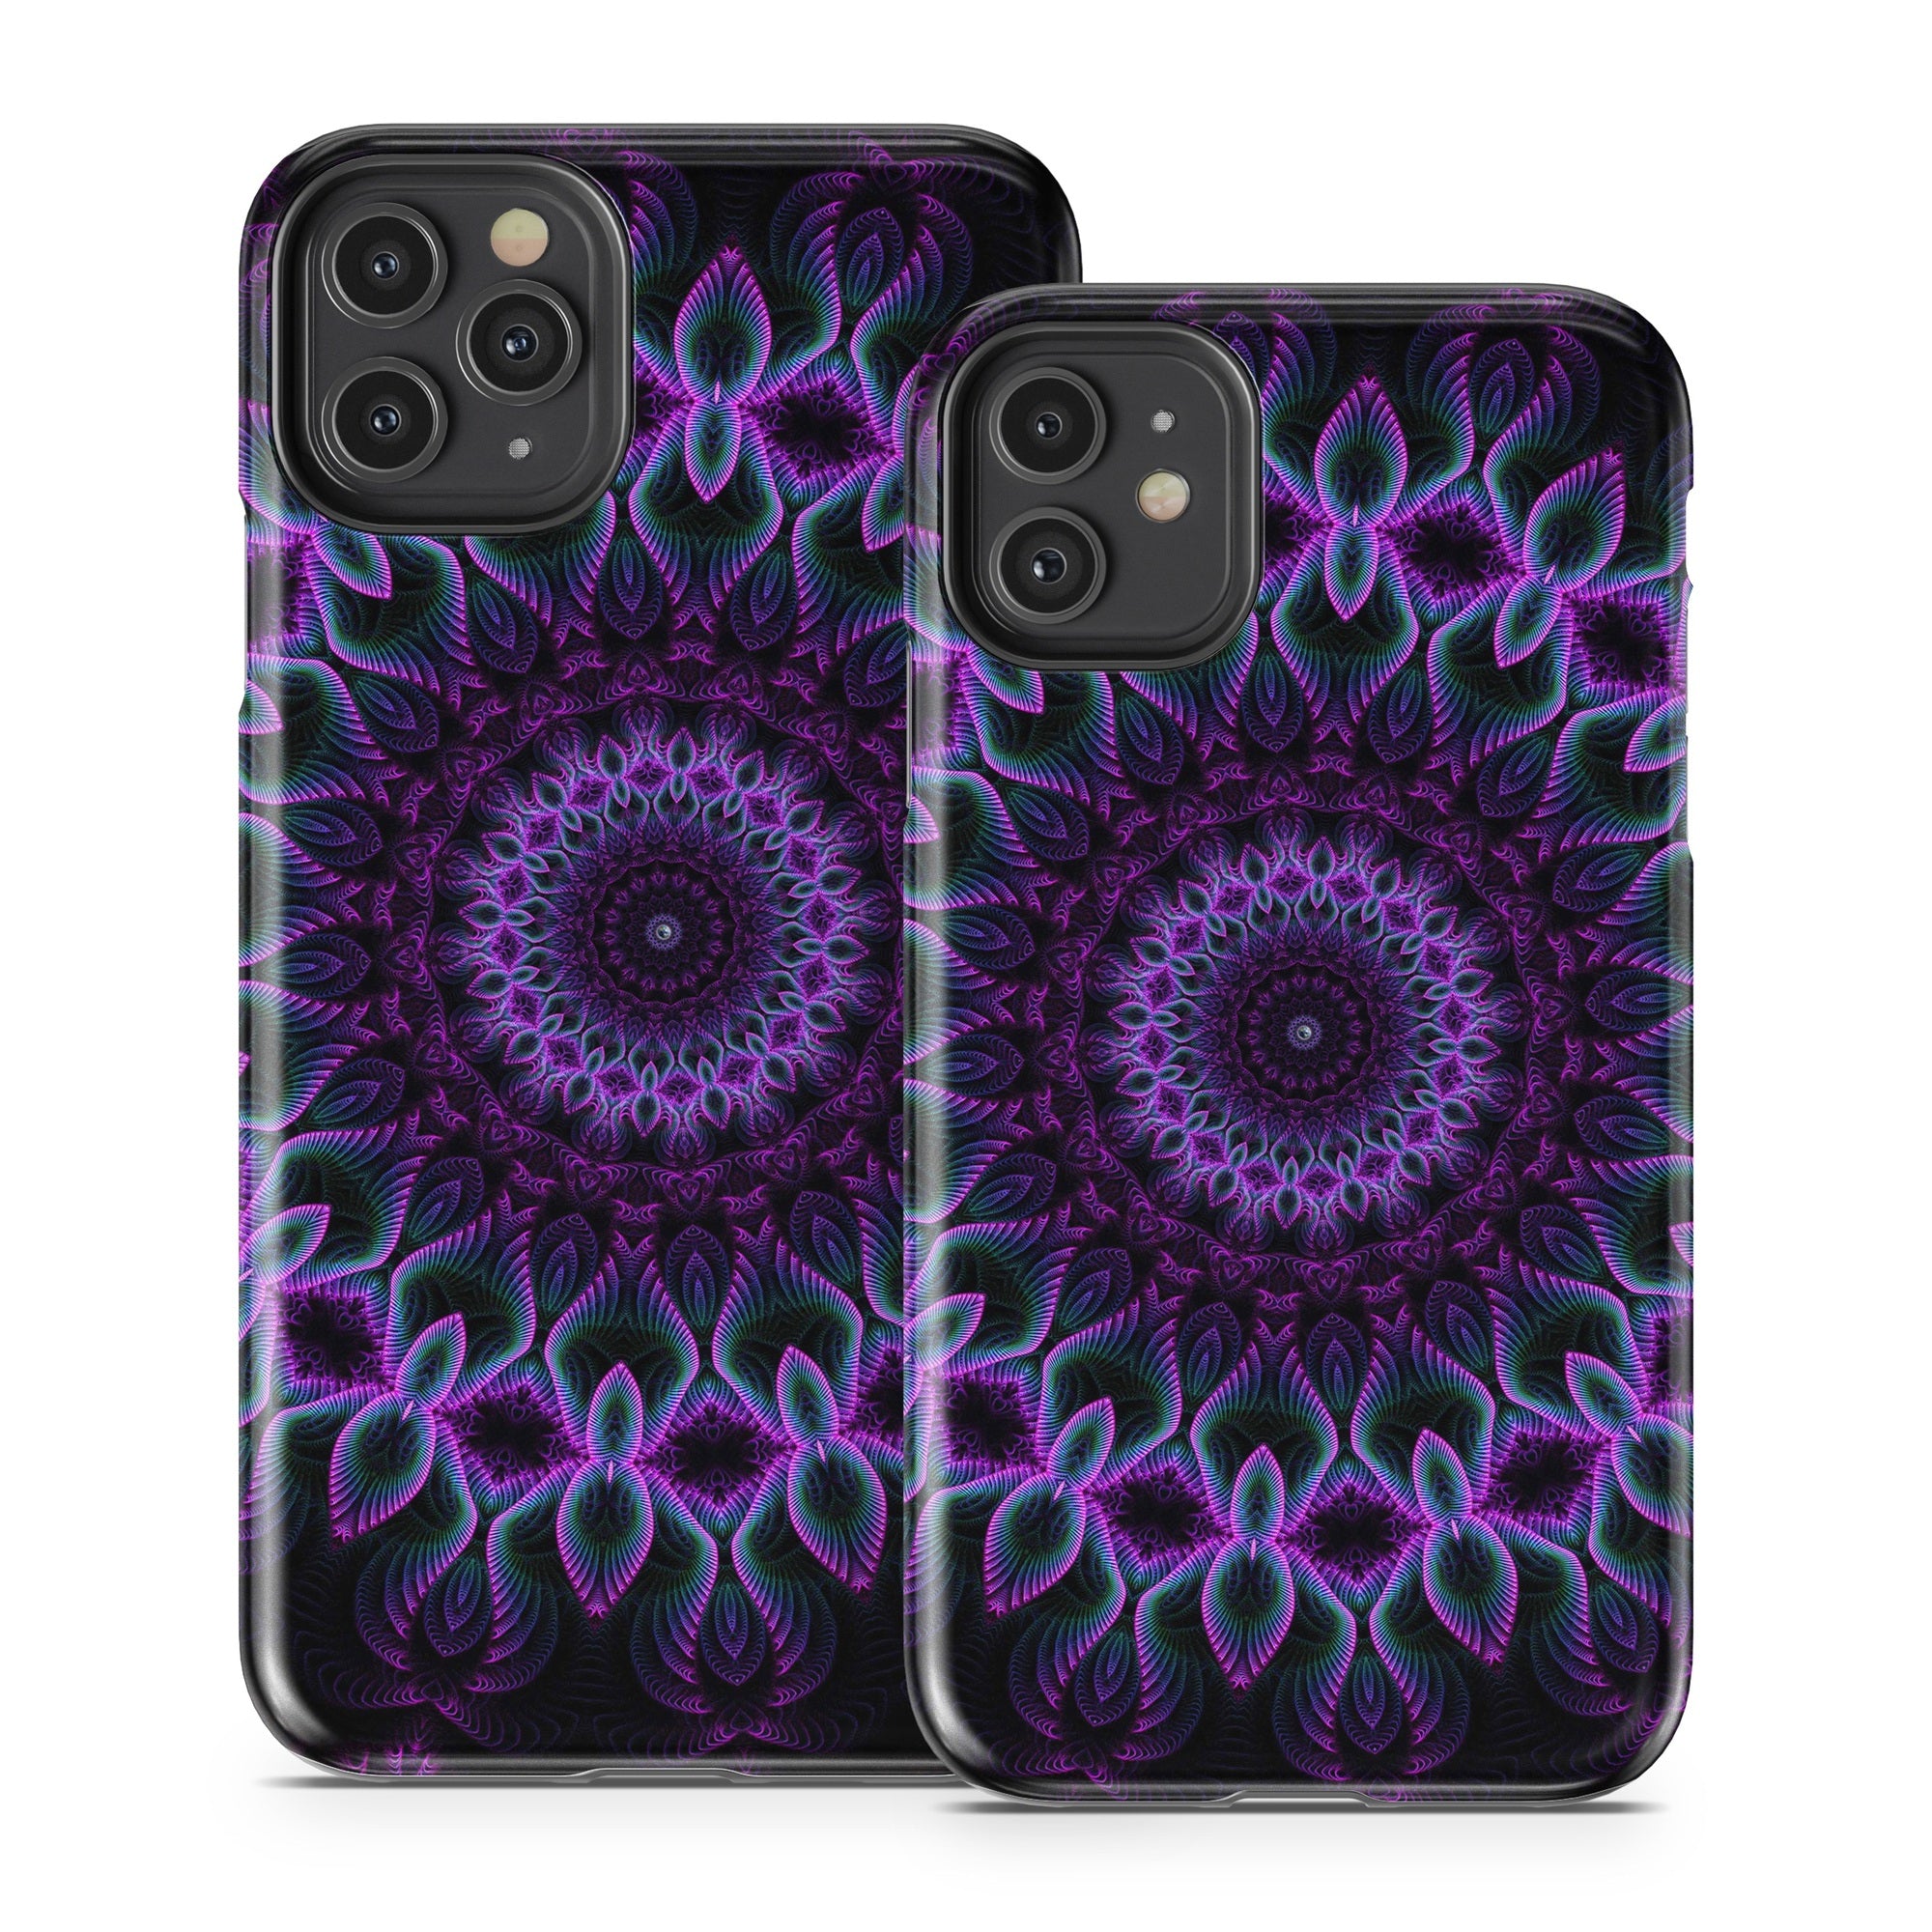 Silence In An Infinite Moment - Apple iPhone 11 Tough Case